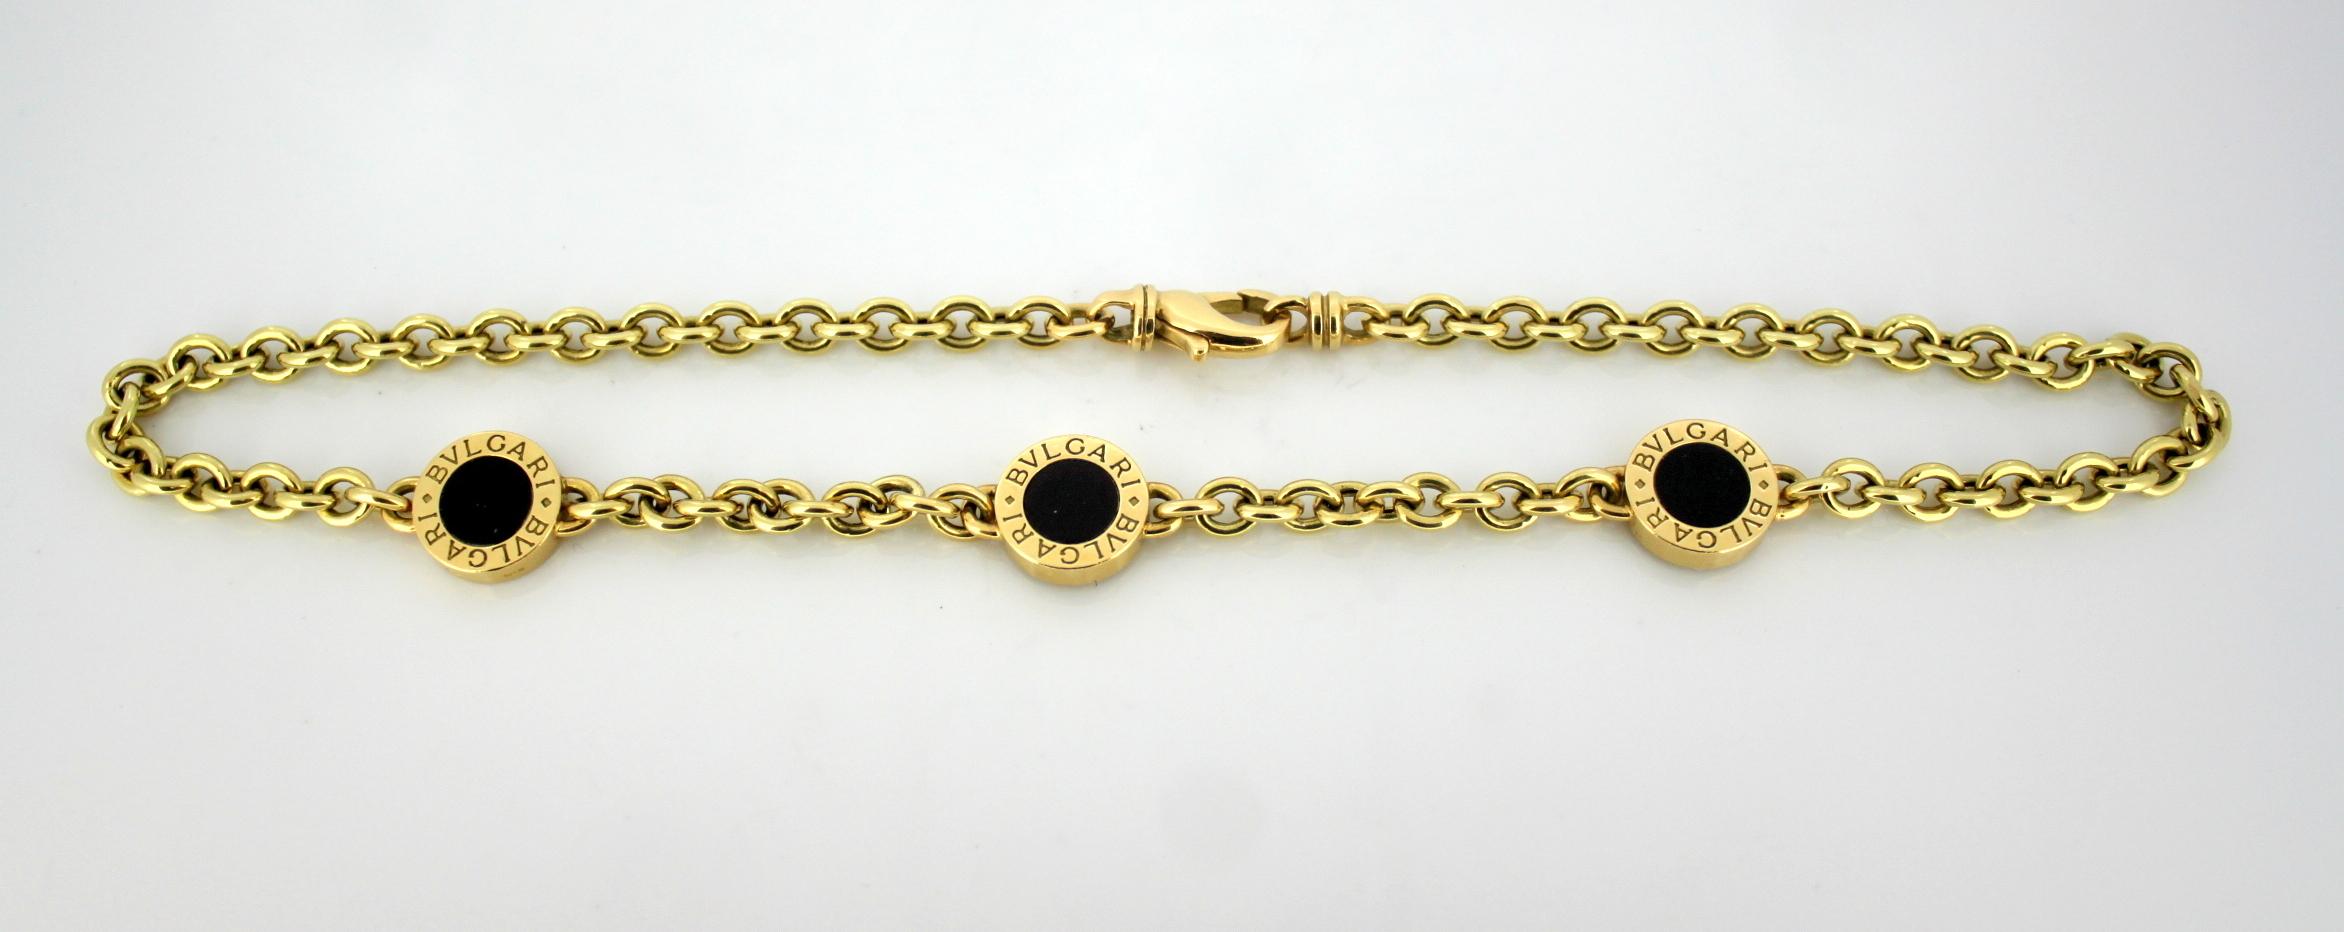 Vintage 18k yellow gold ladies necklace with onyx 
Designer : Bvlgari 
Made in : Italy Circa.1990's 
Fully hallmarked 

Dimensions - 
Length x Width : 40 x 2 cm 
Weight : 31 grams 

Condition: Necklace is pre-owned, has some minor wear from general